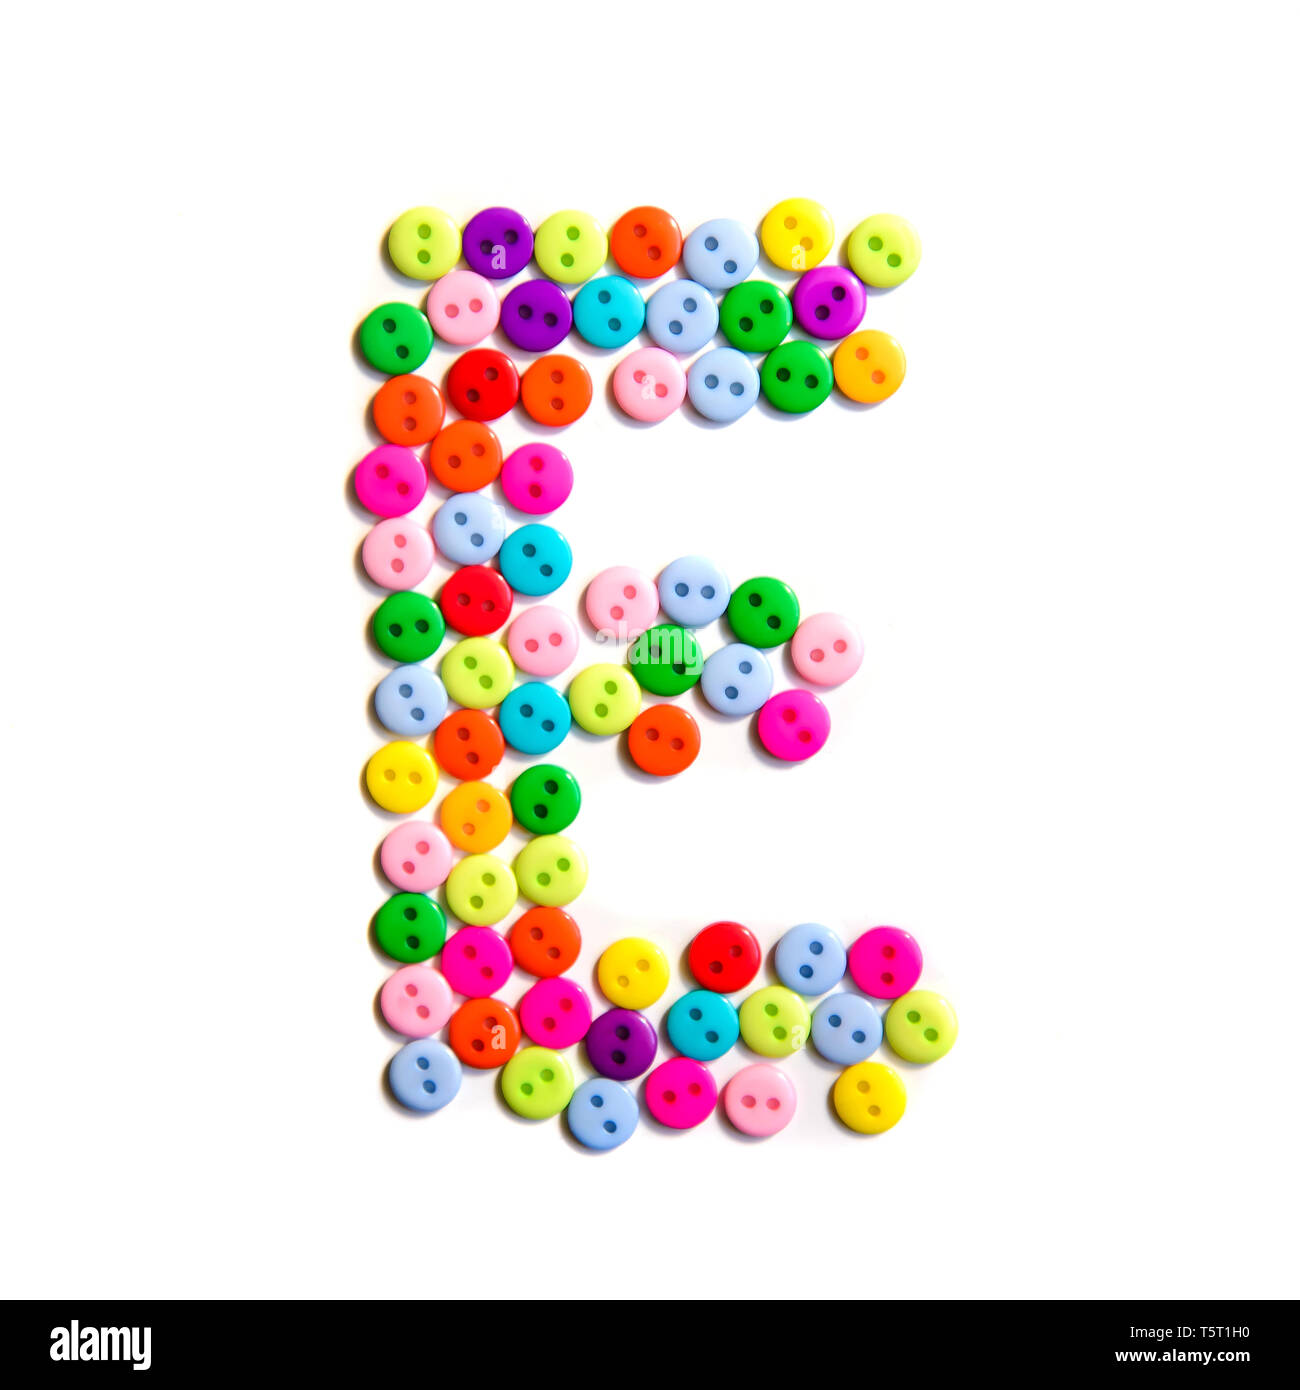 Letter E of the English alphabet from a group of colorful small buttons on a white background Stock Photo